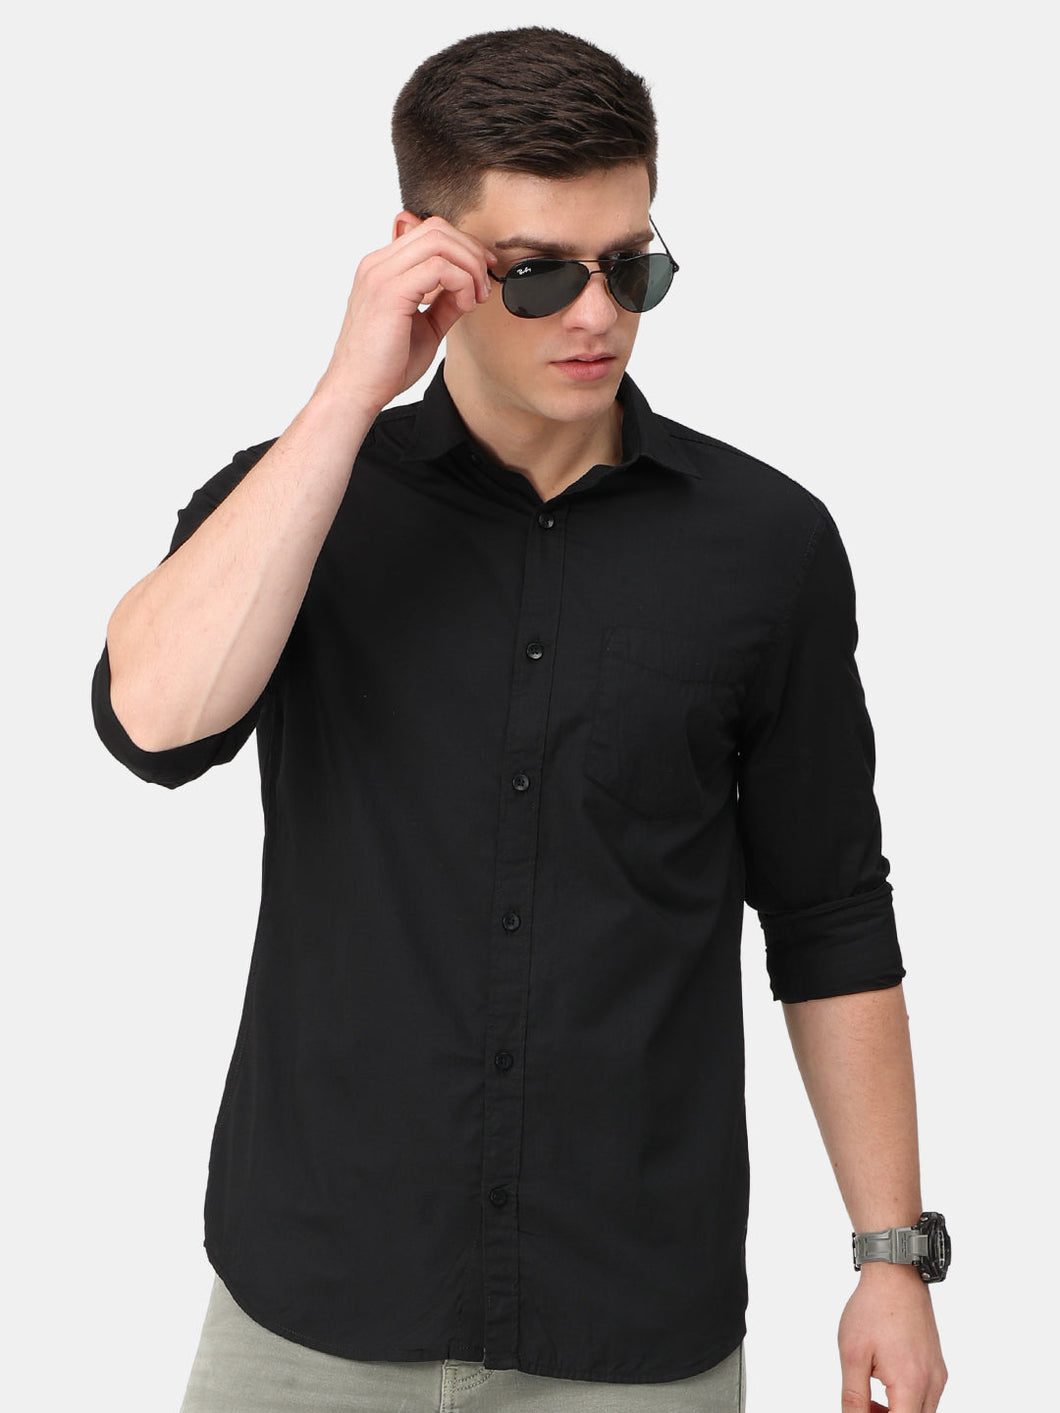 Solid Black Cotton Shirt Shirt www.epysode.in 